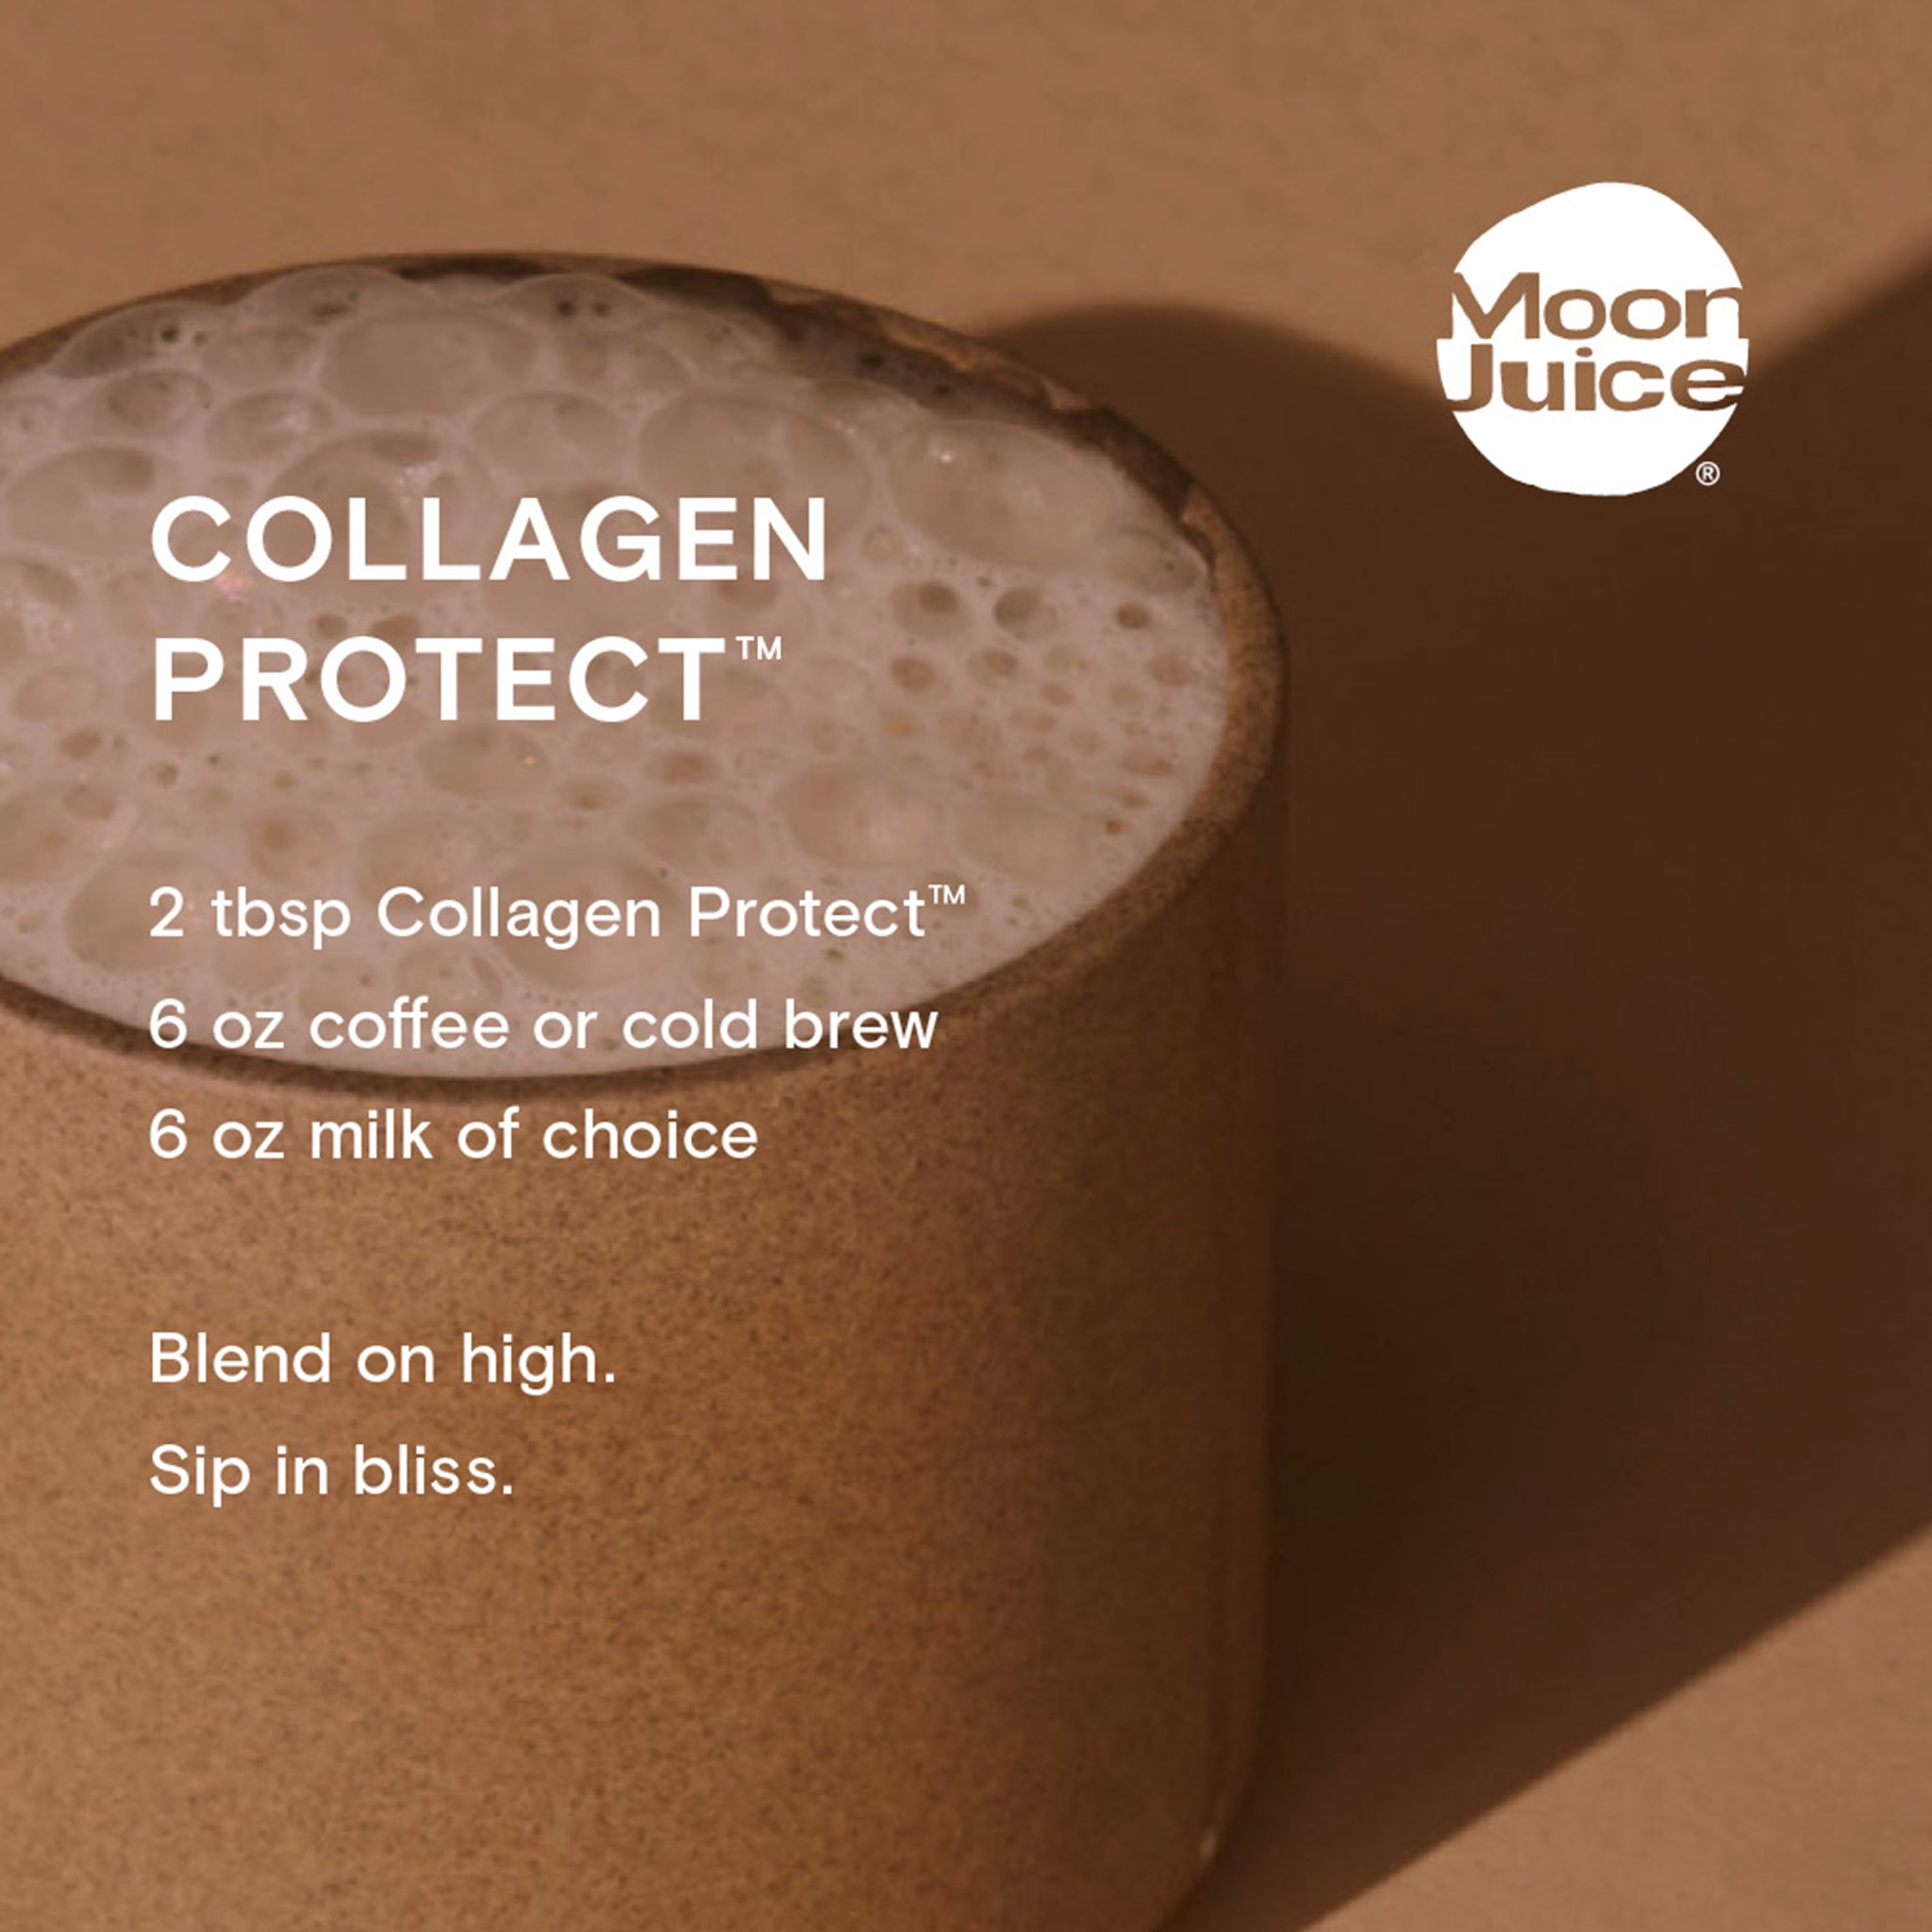 Collagen Protect - Skincare You Can Drink